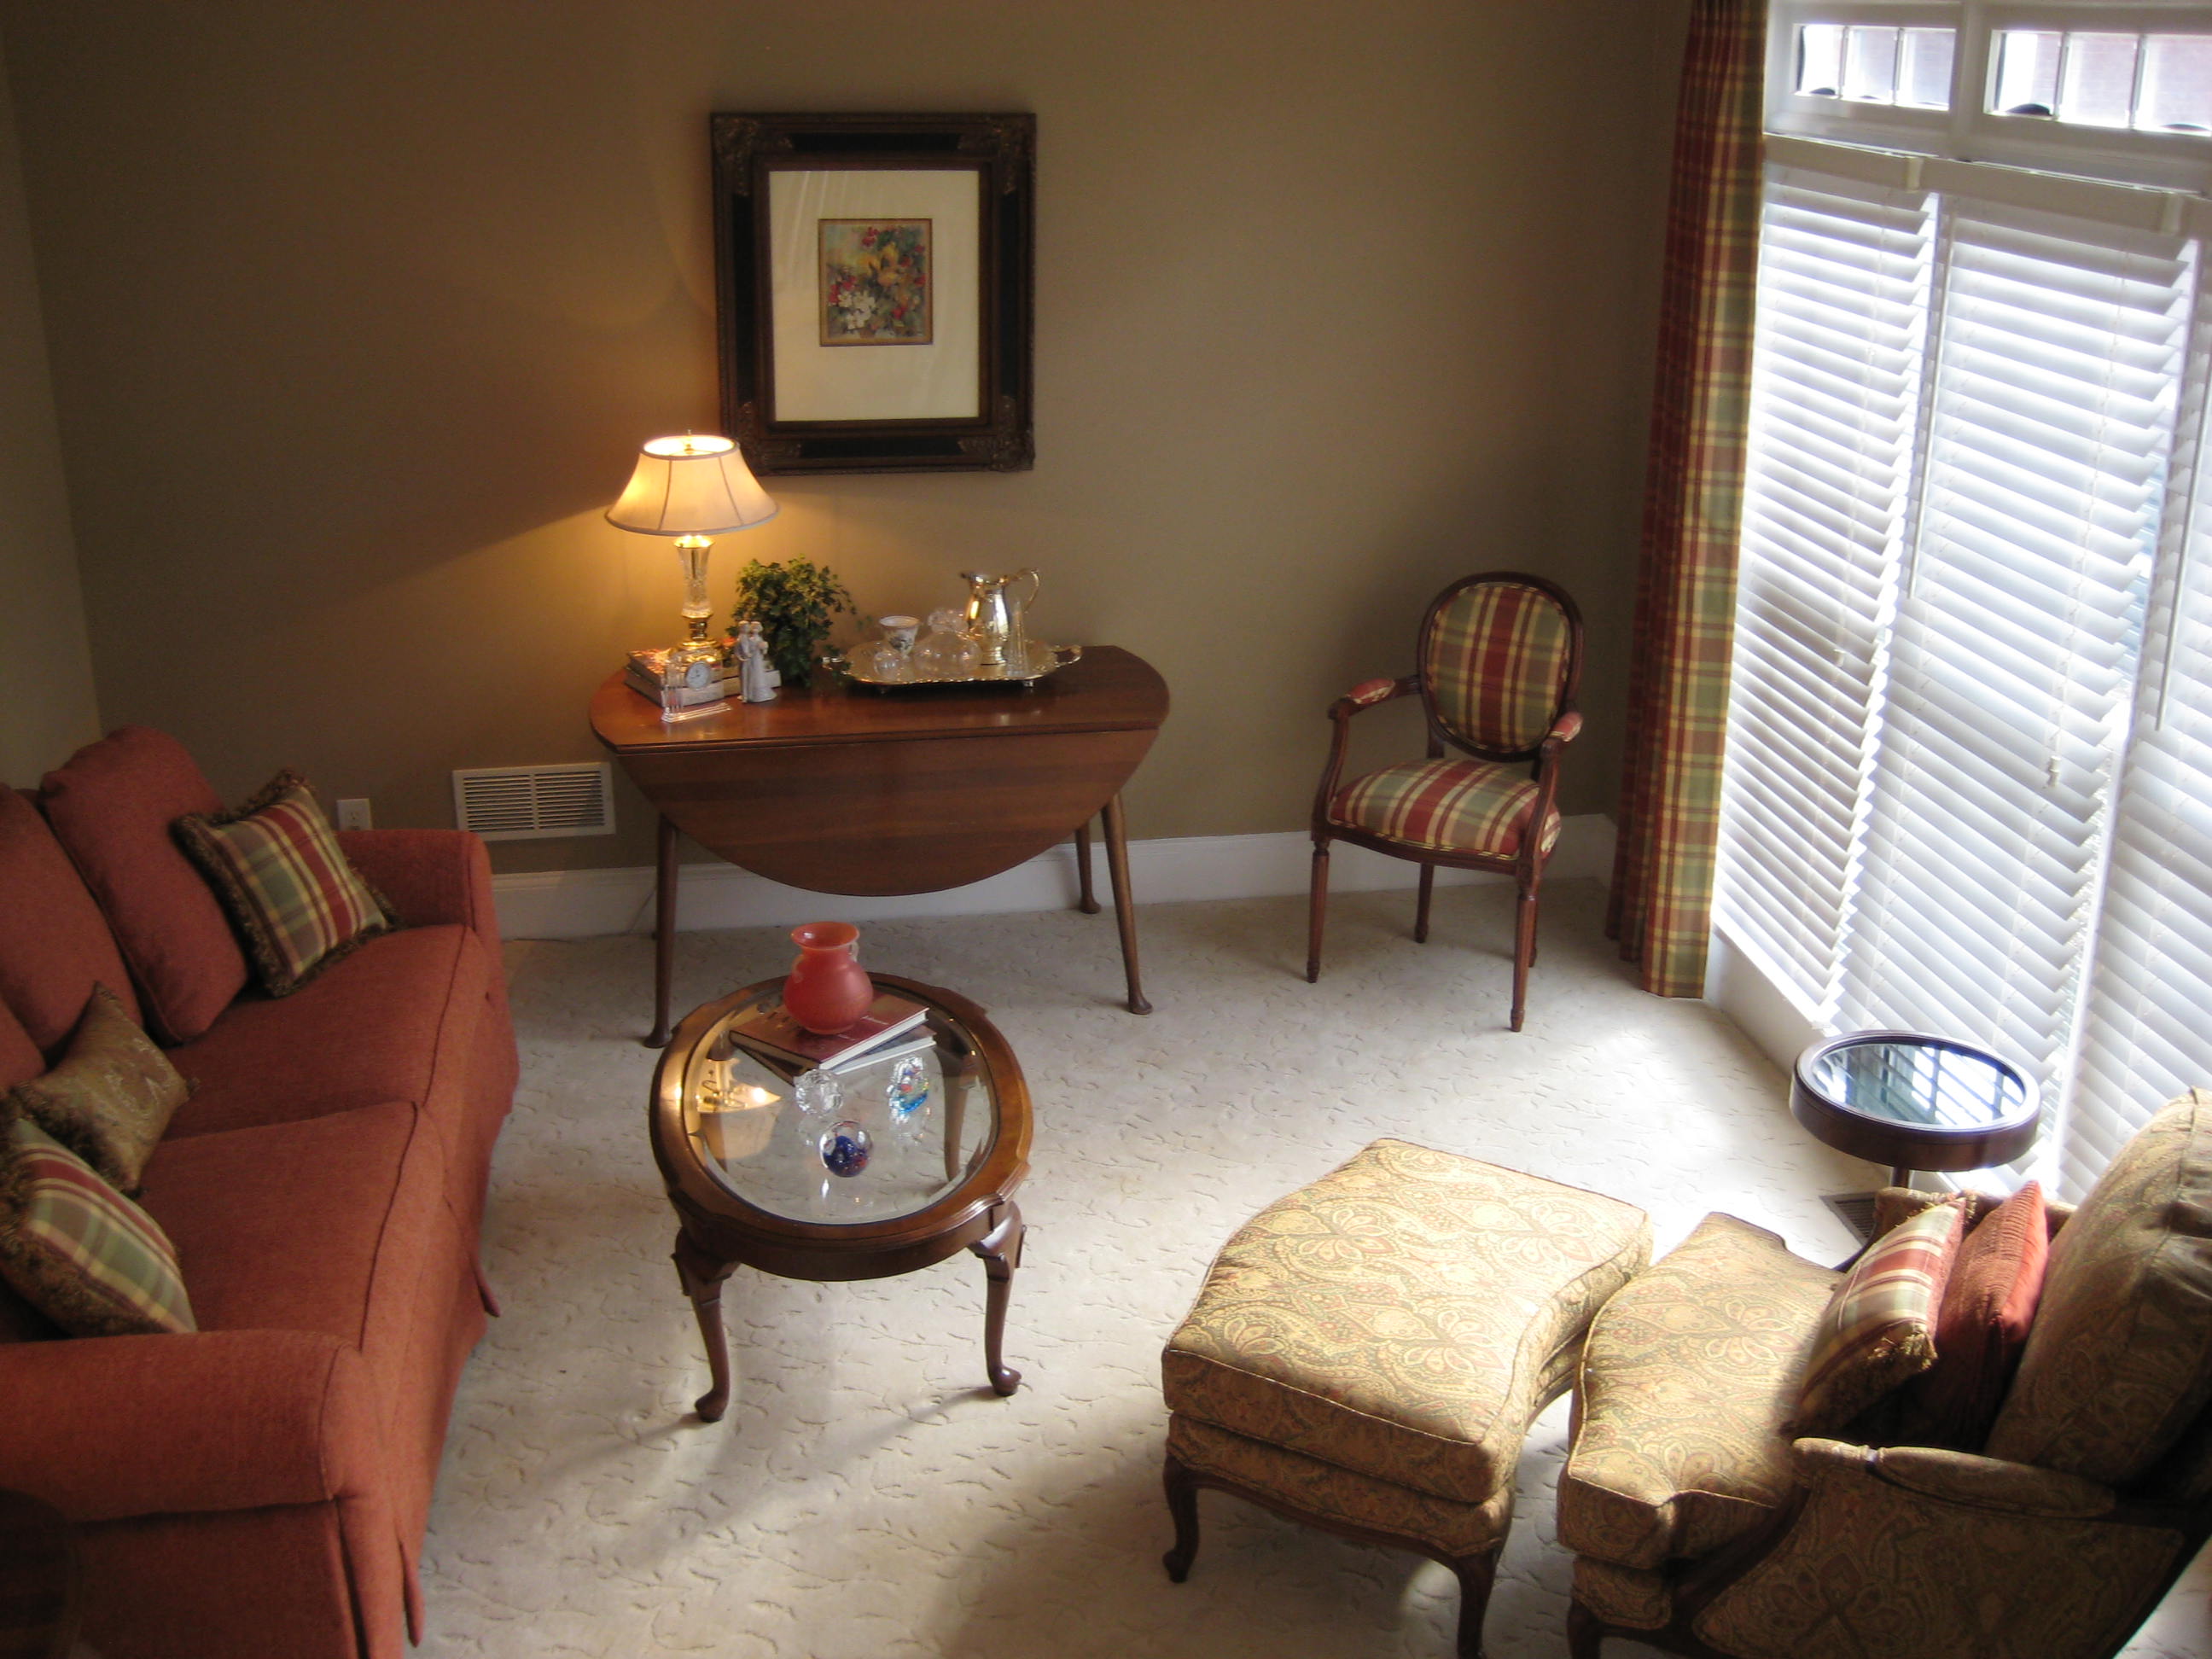 Living Rm. Make over. Upholstery, Window Treatments, etc.